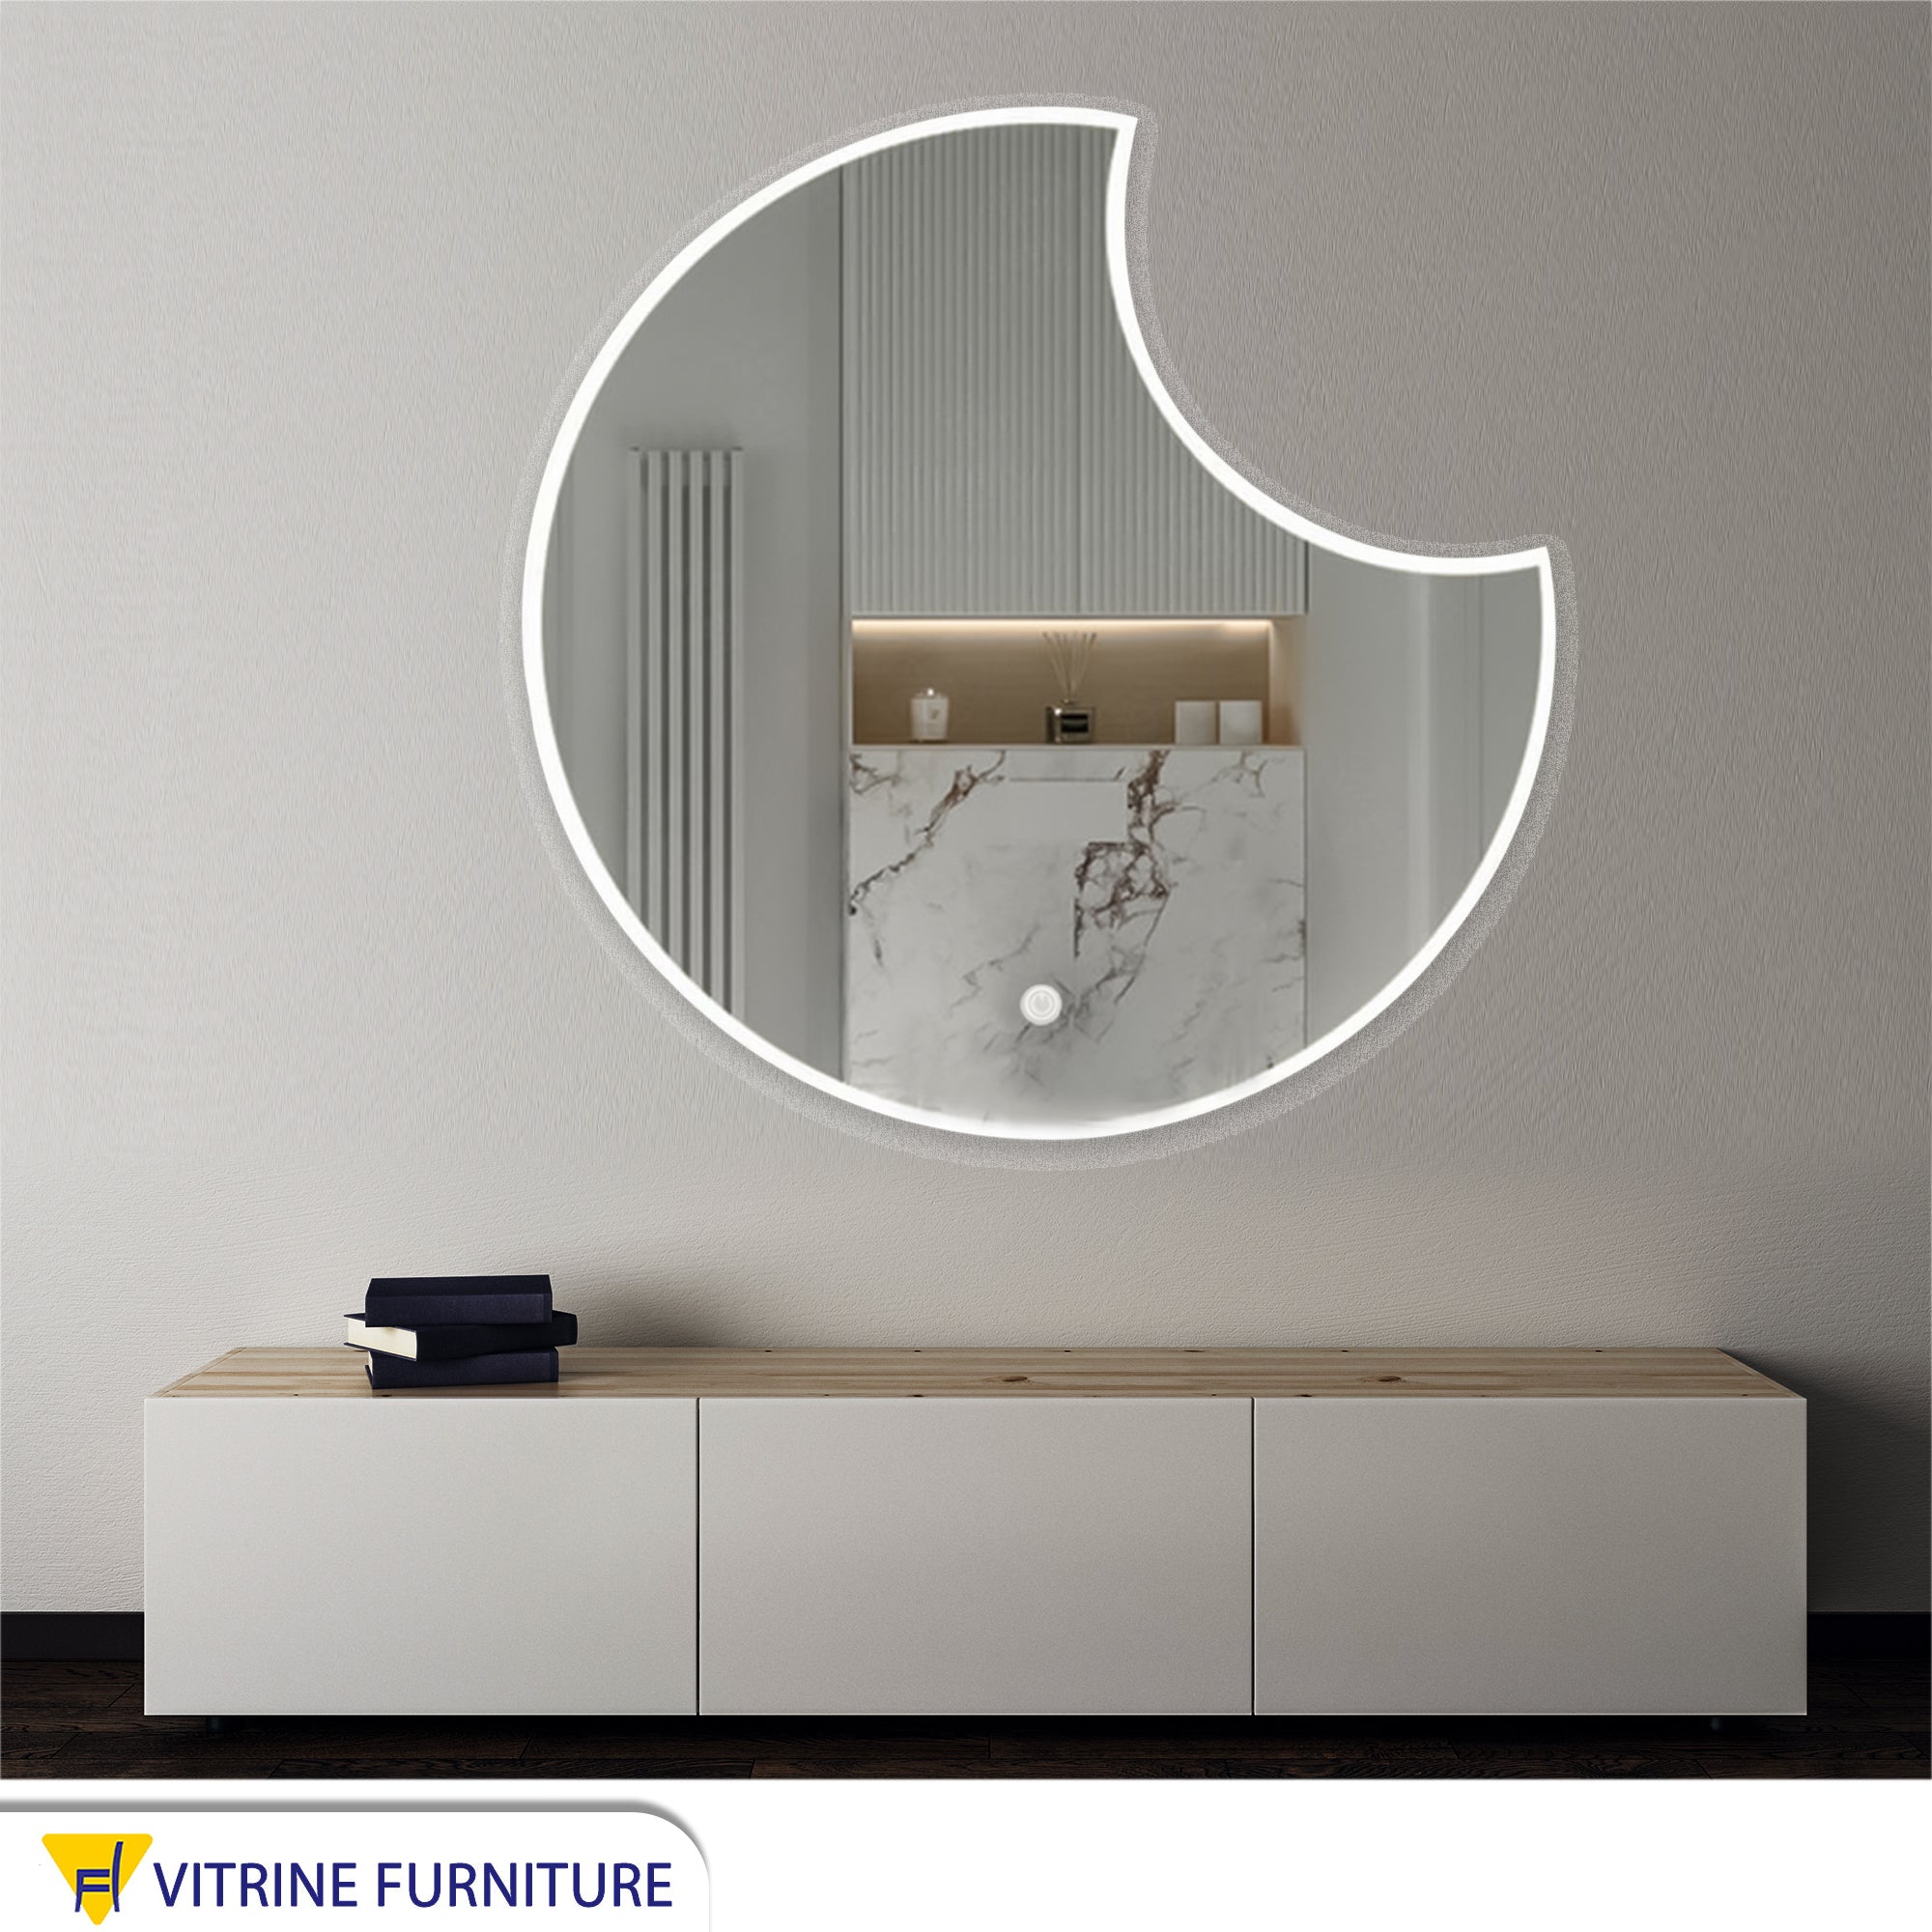 LED mirror in the shape of a crescent moon